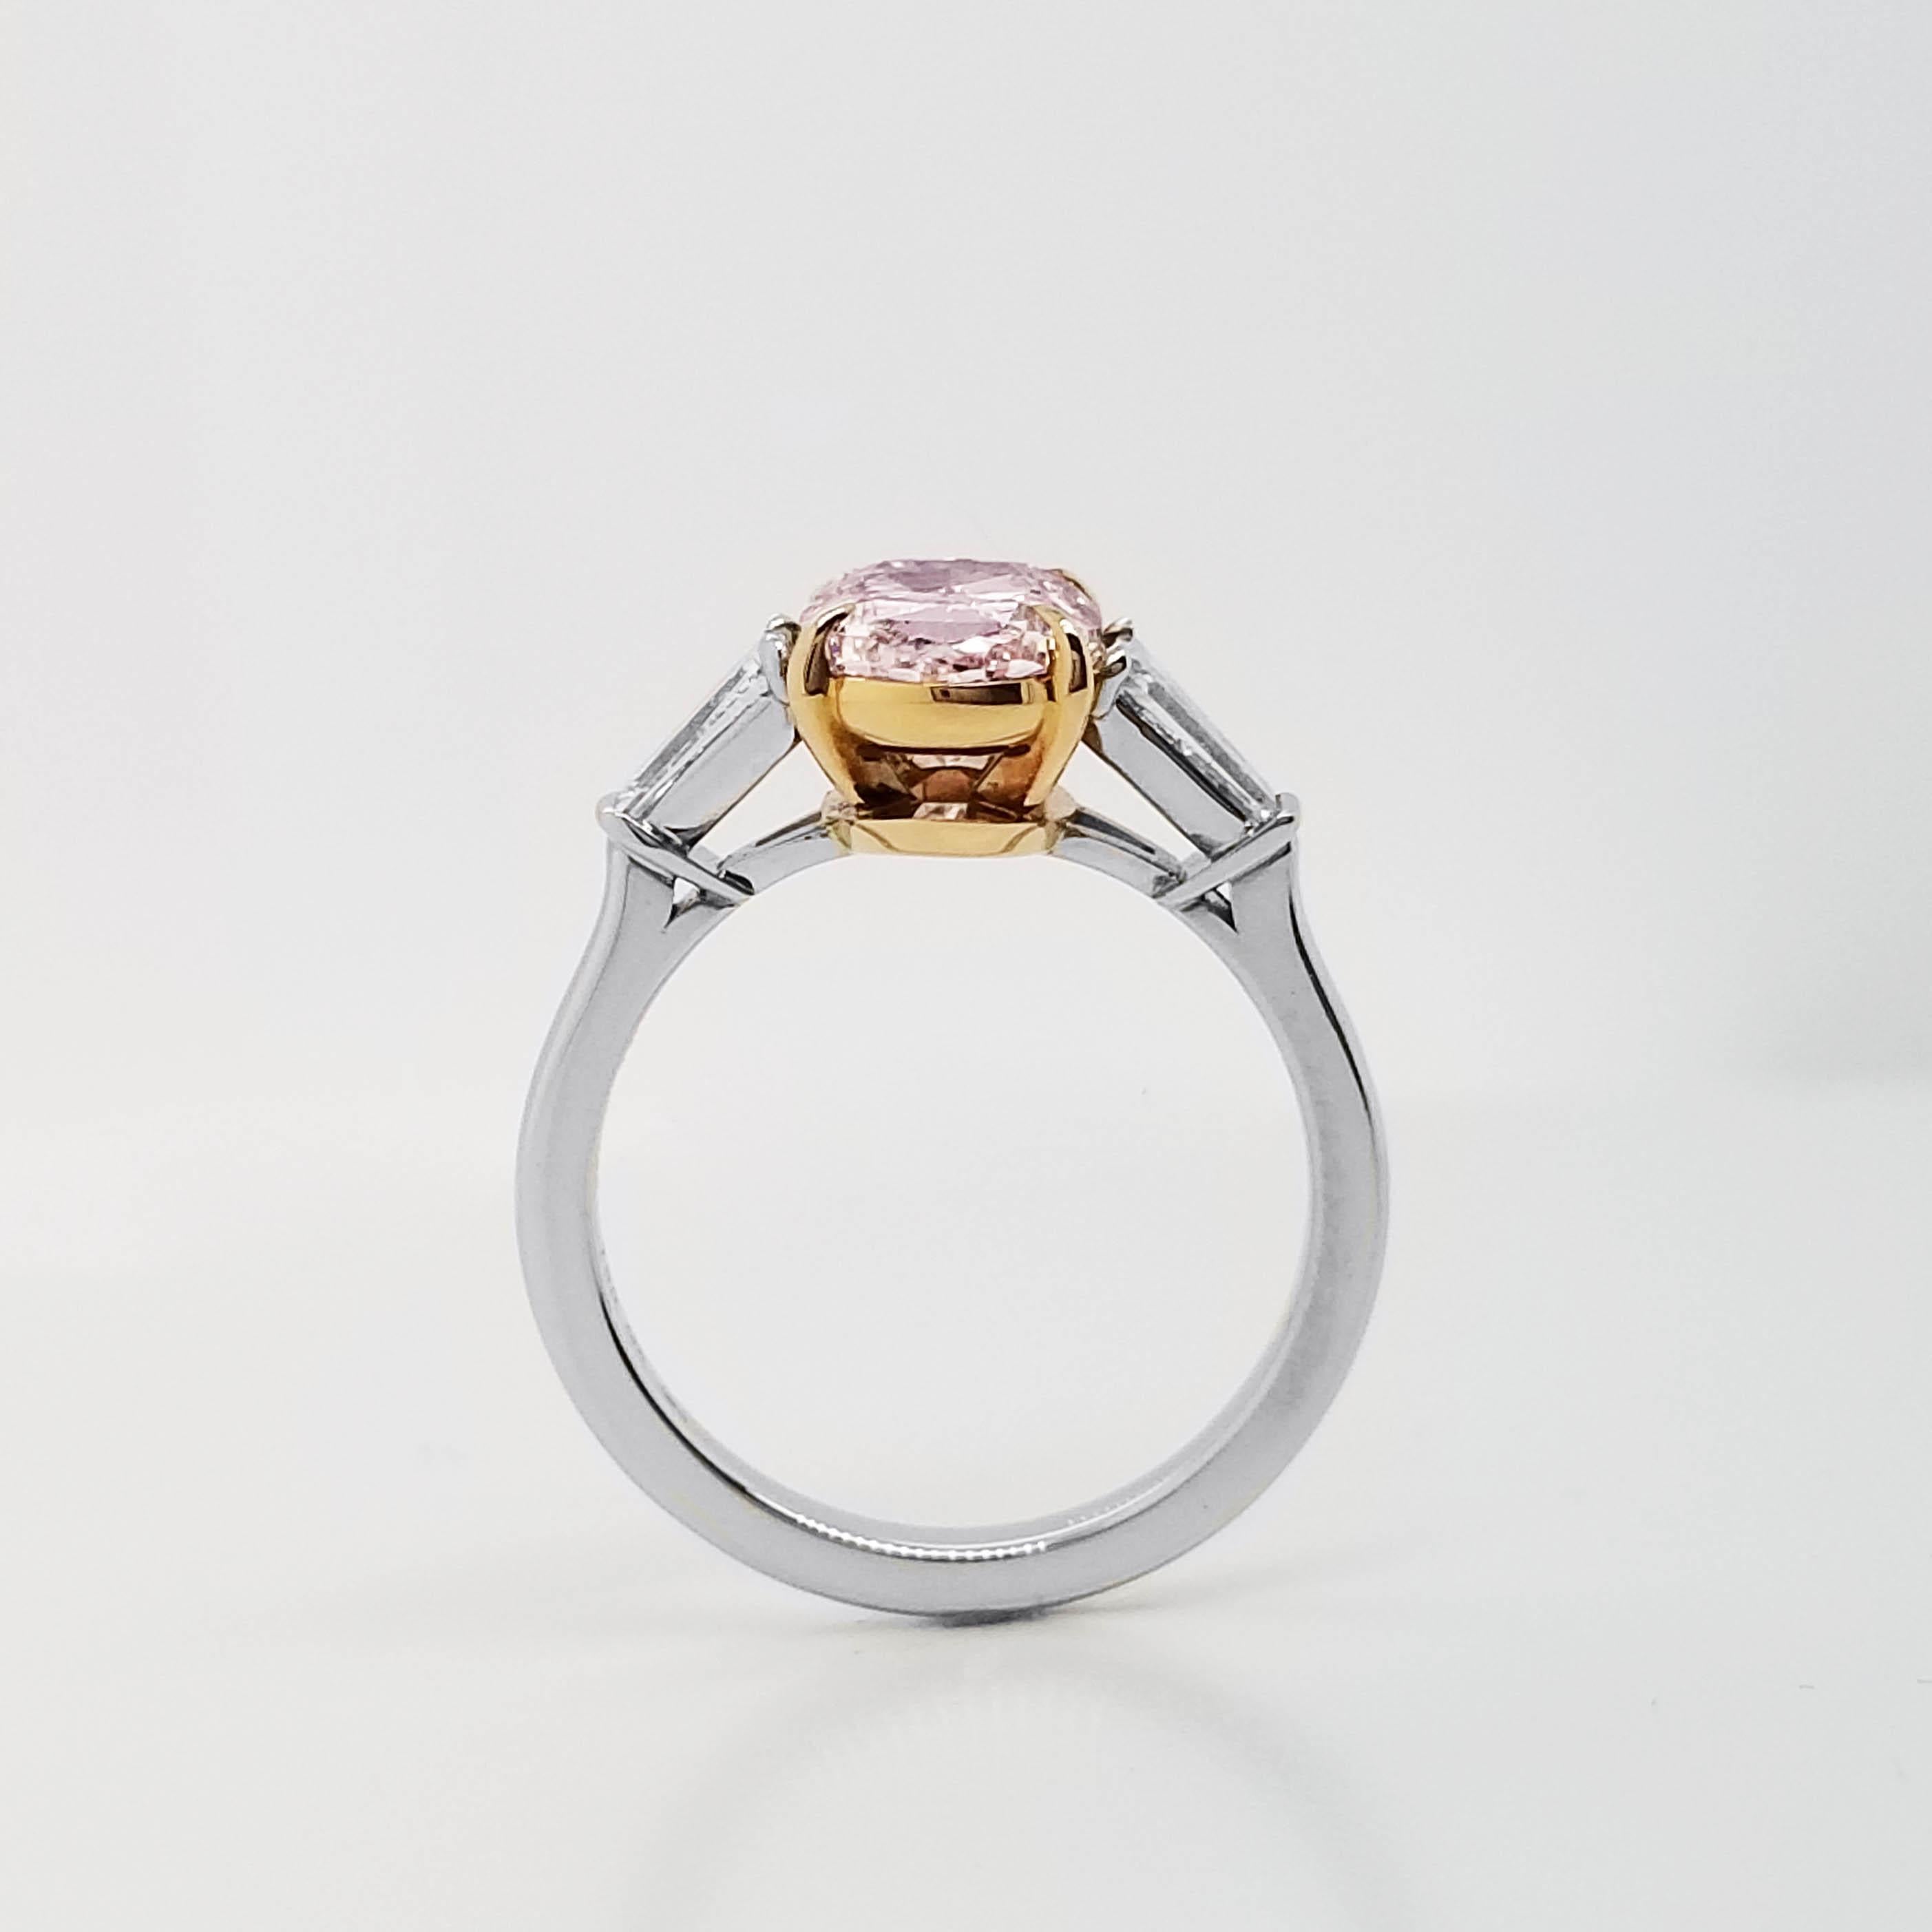 Contemporary SCARSELLI 2 Carat Fancy Purple Pink Diamond Solitaire Ring GIA For Sale